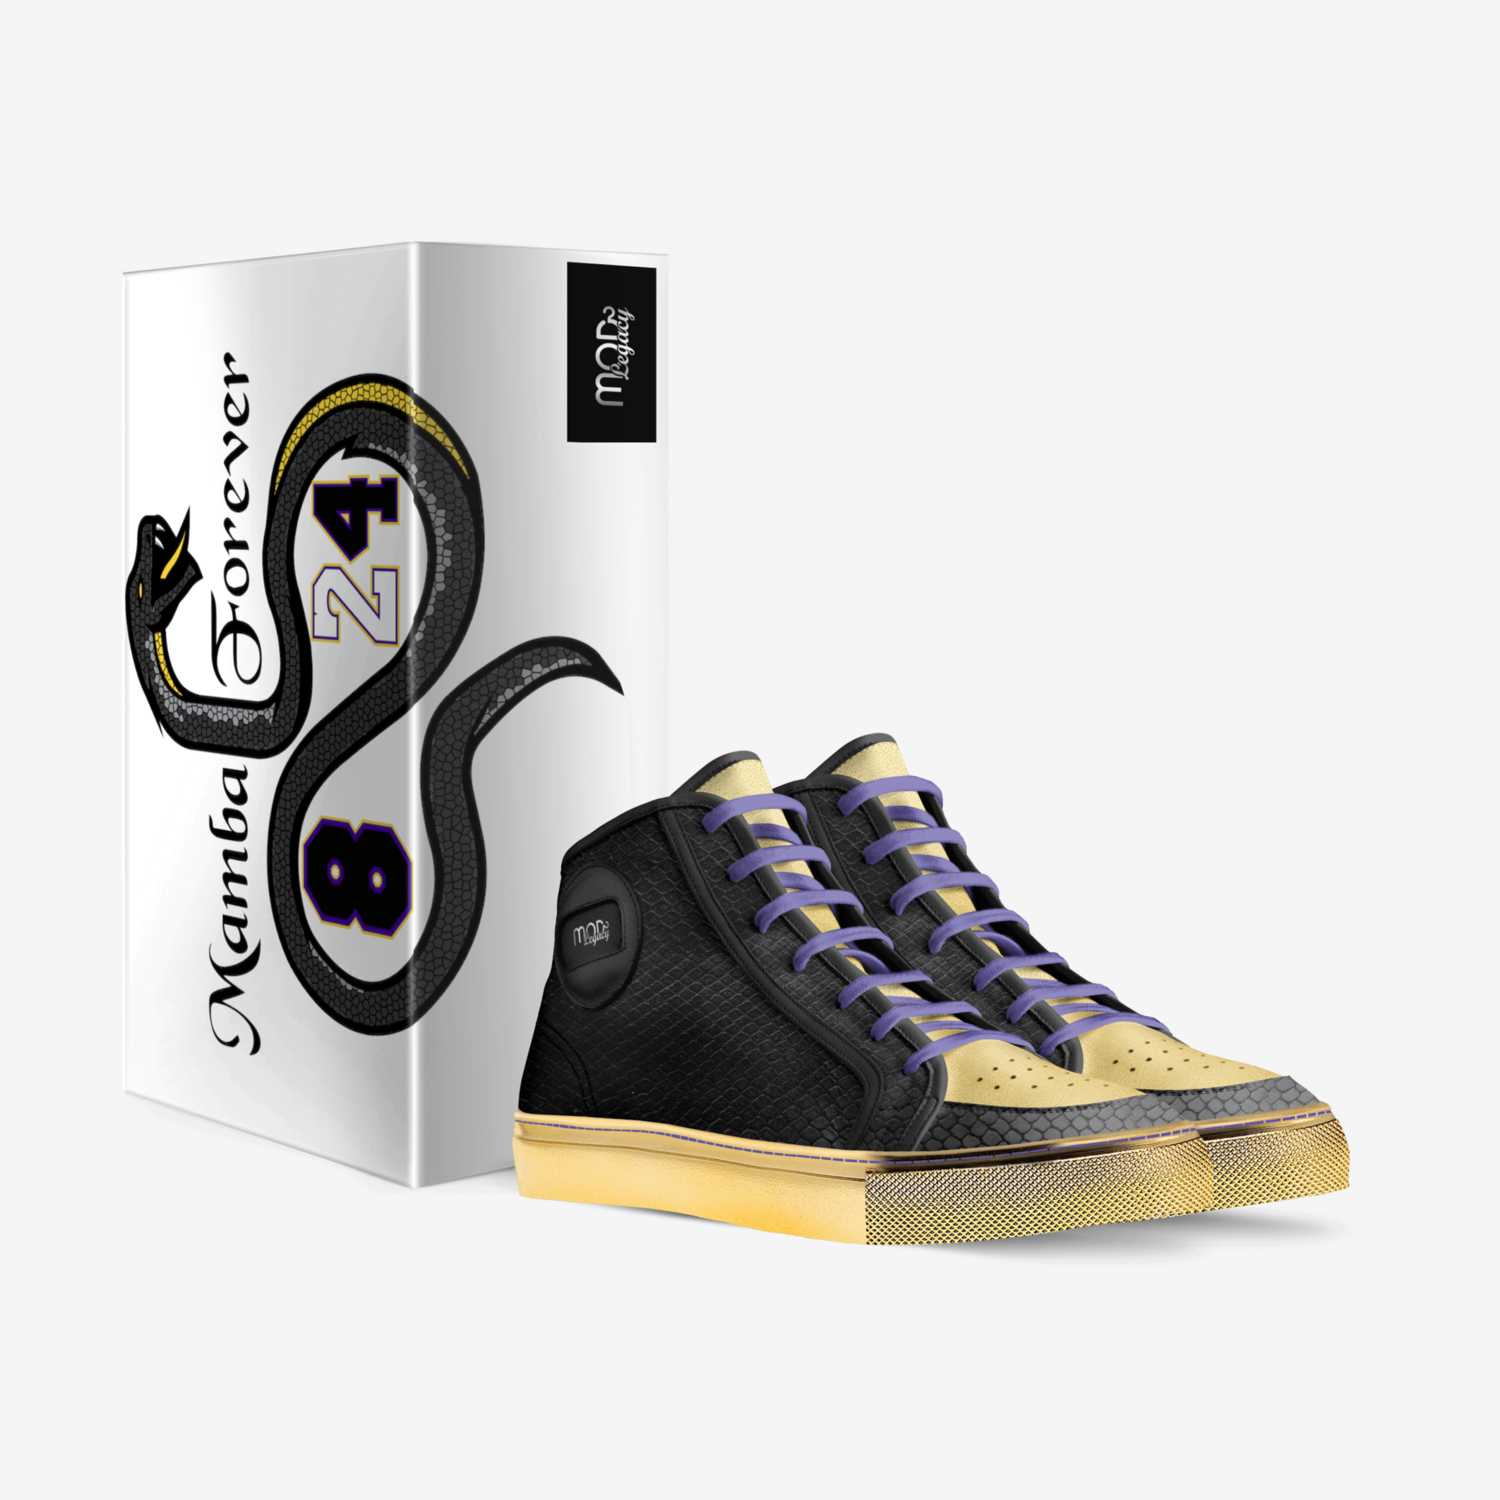 MAMBA FOREVER custom made in Italy shoes by Blake Alexandros | Box view